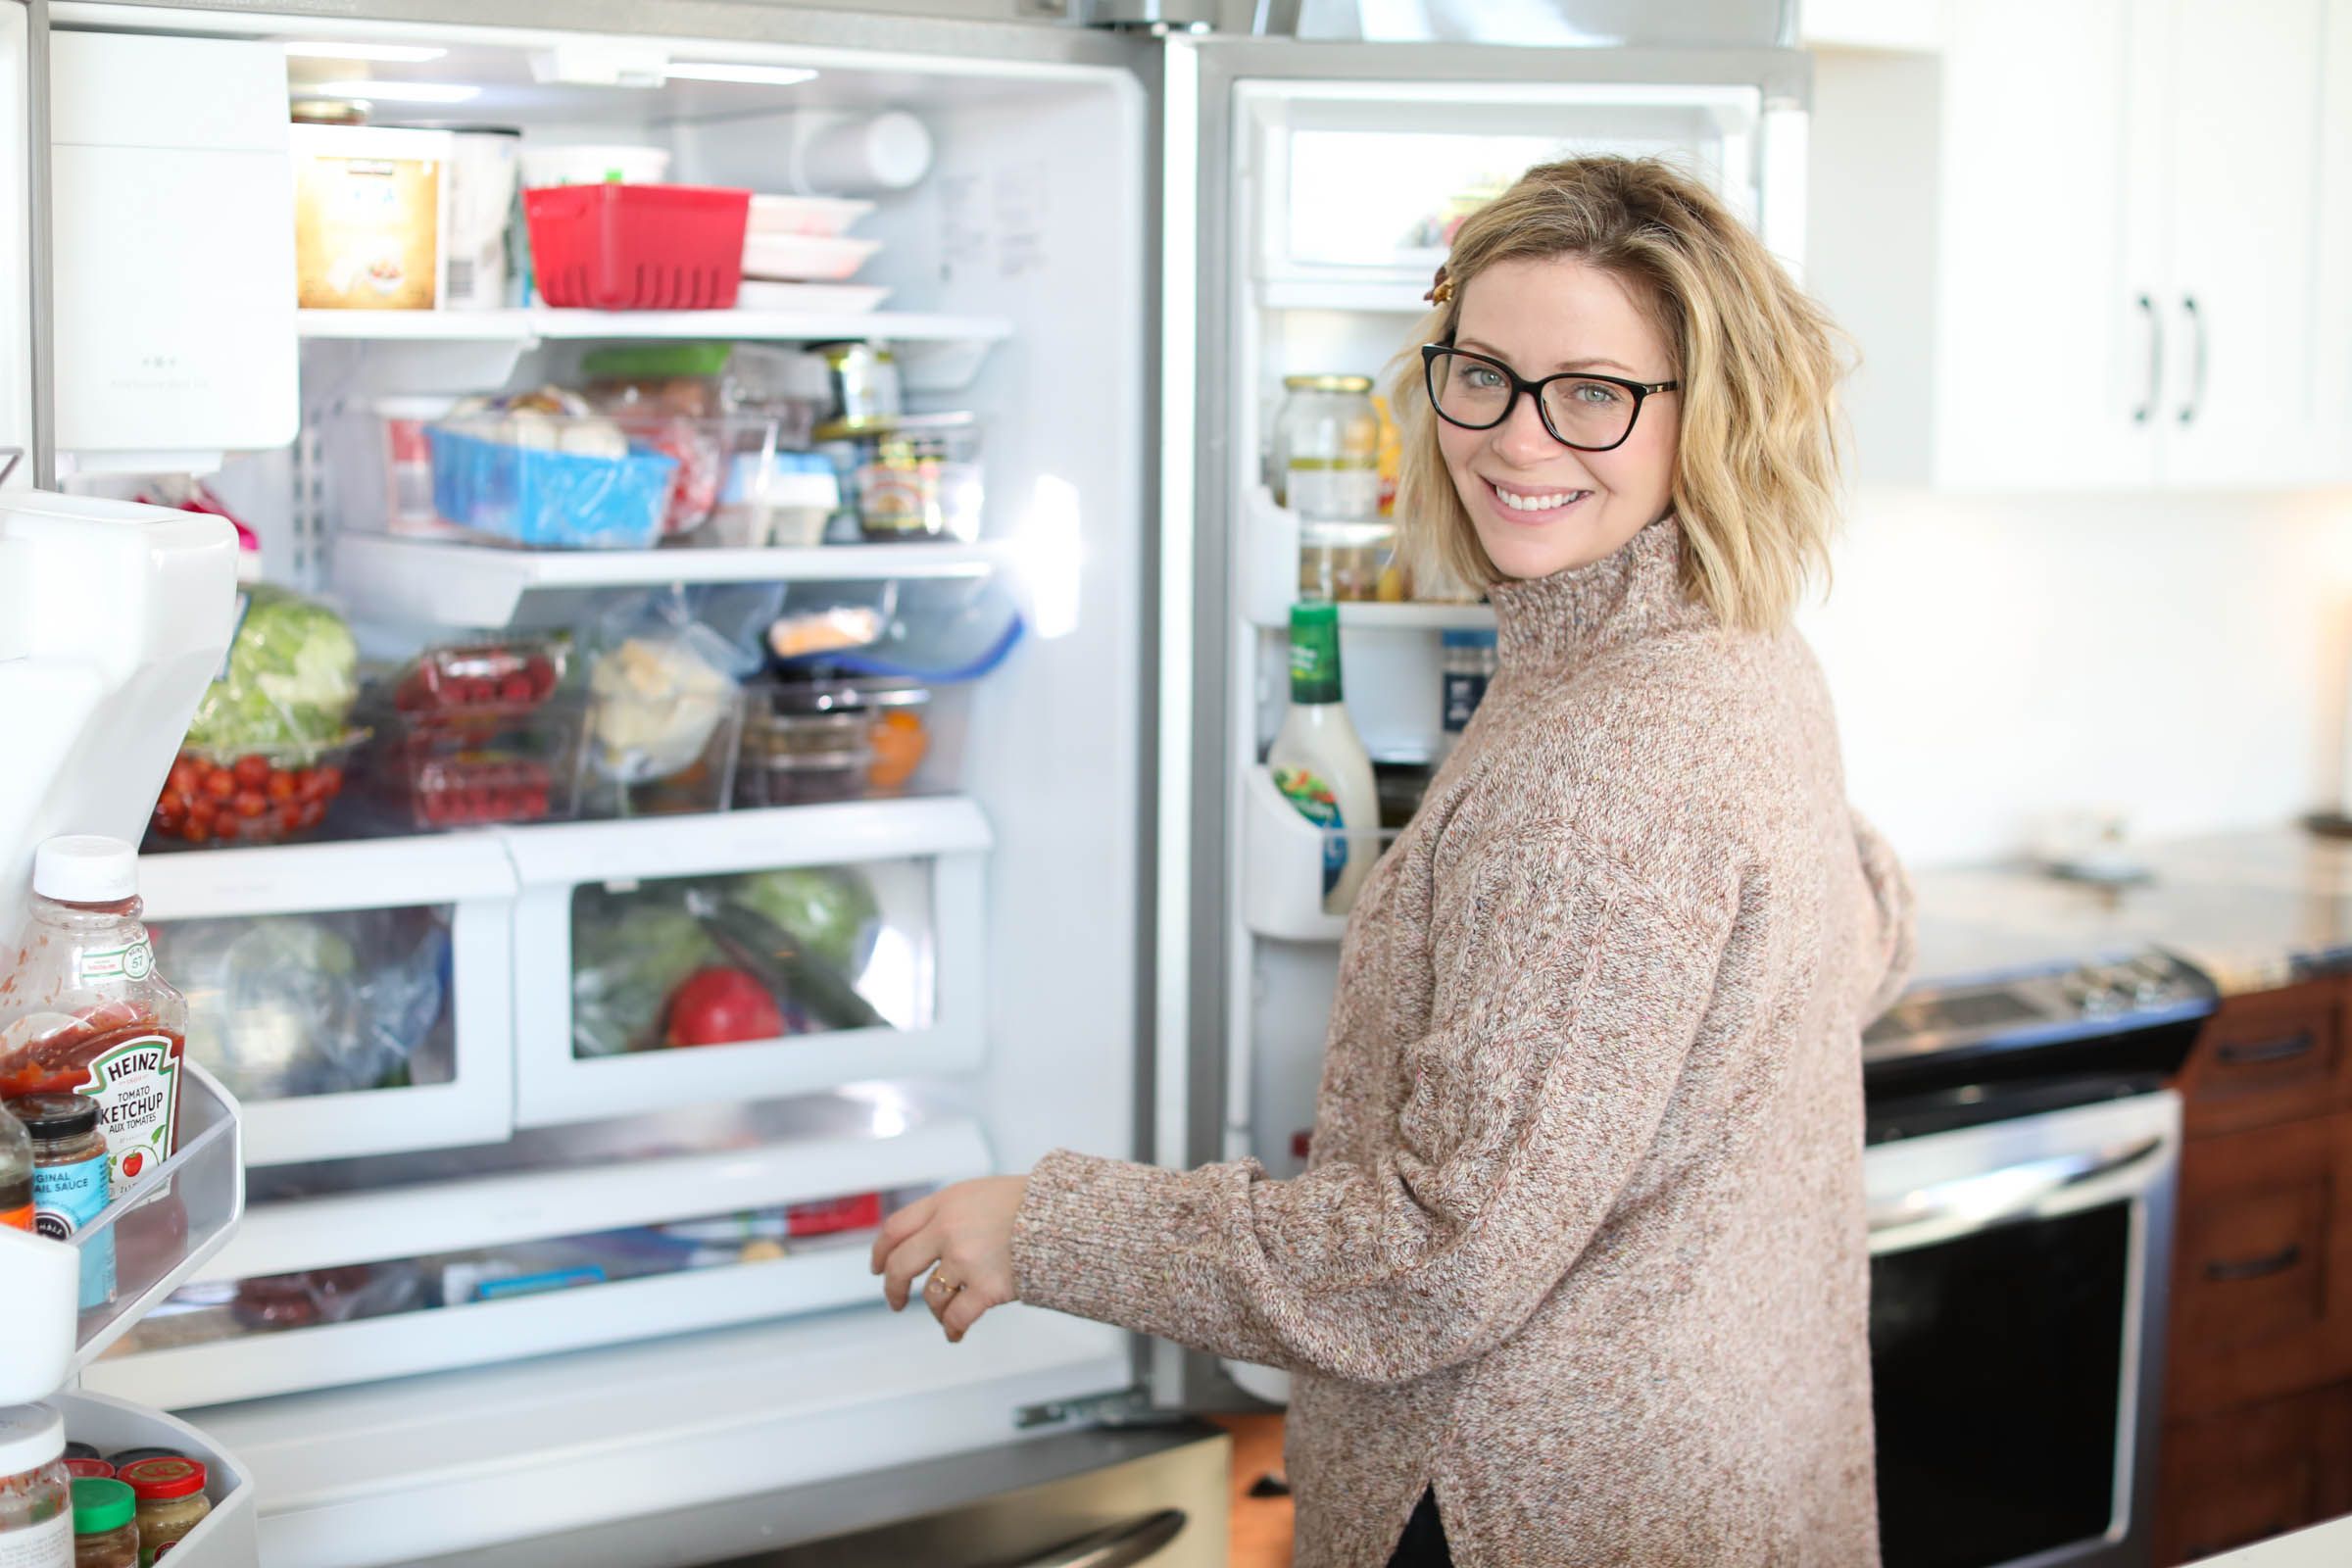 How to Clean Your Fridge Like the Pros in 8 Easy Steps